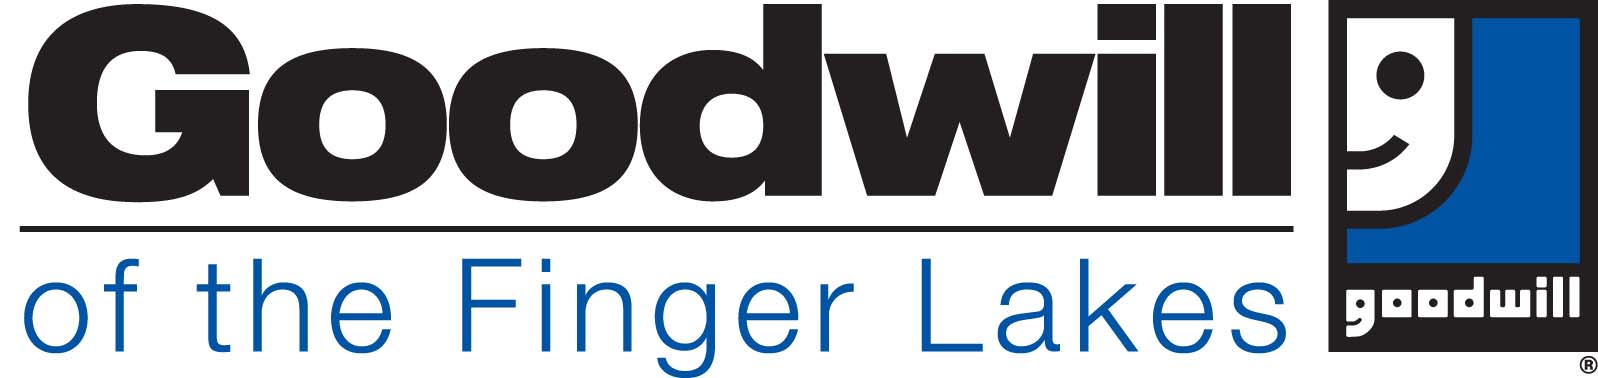 Goodwill of The Finger Lakes Logo